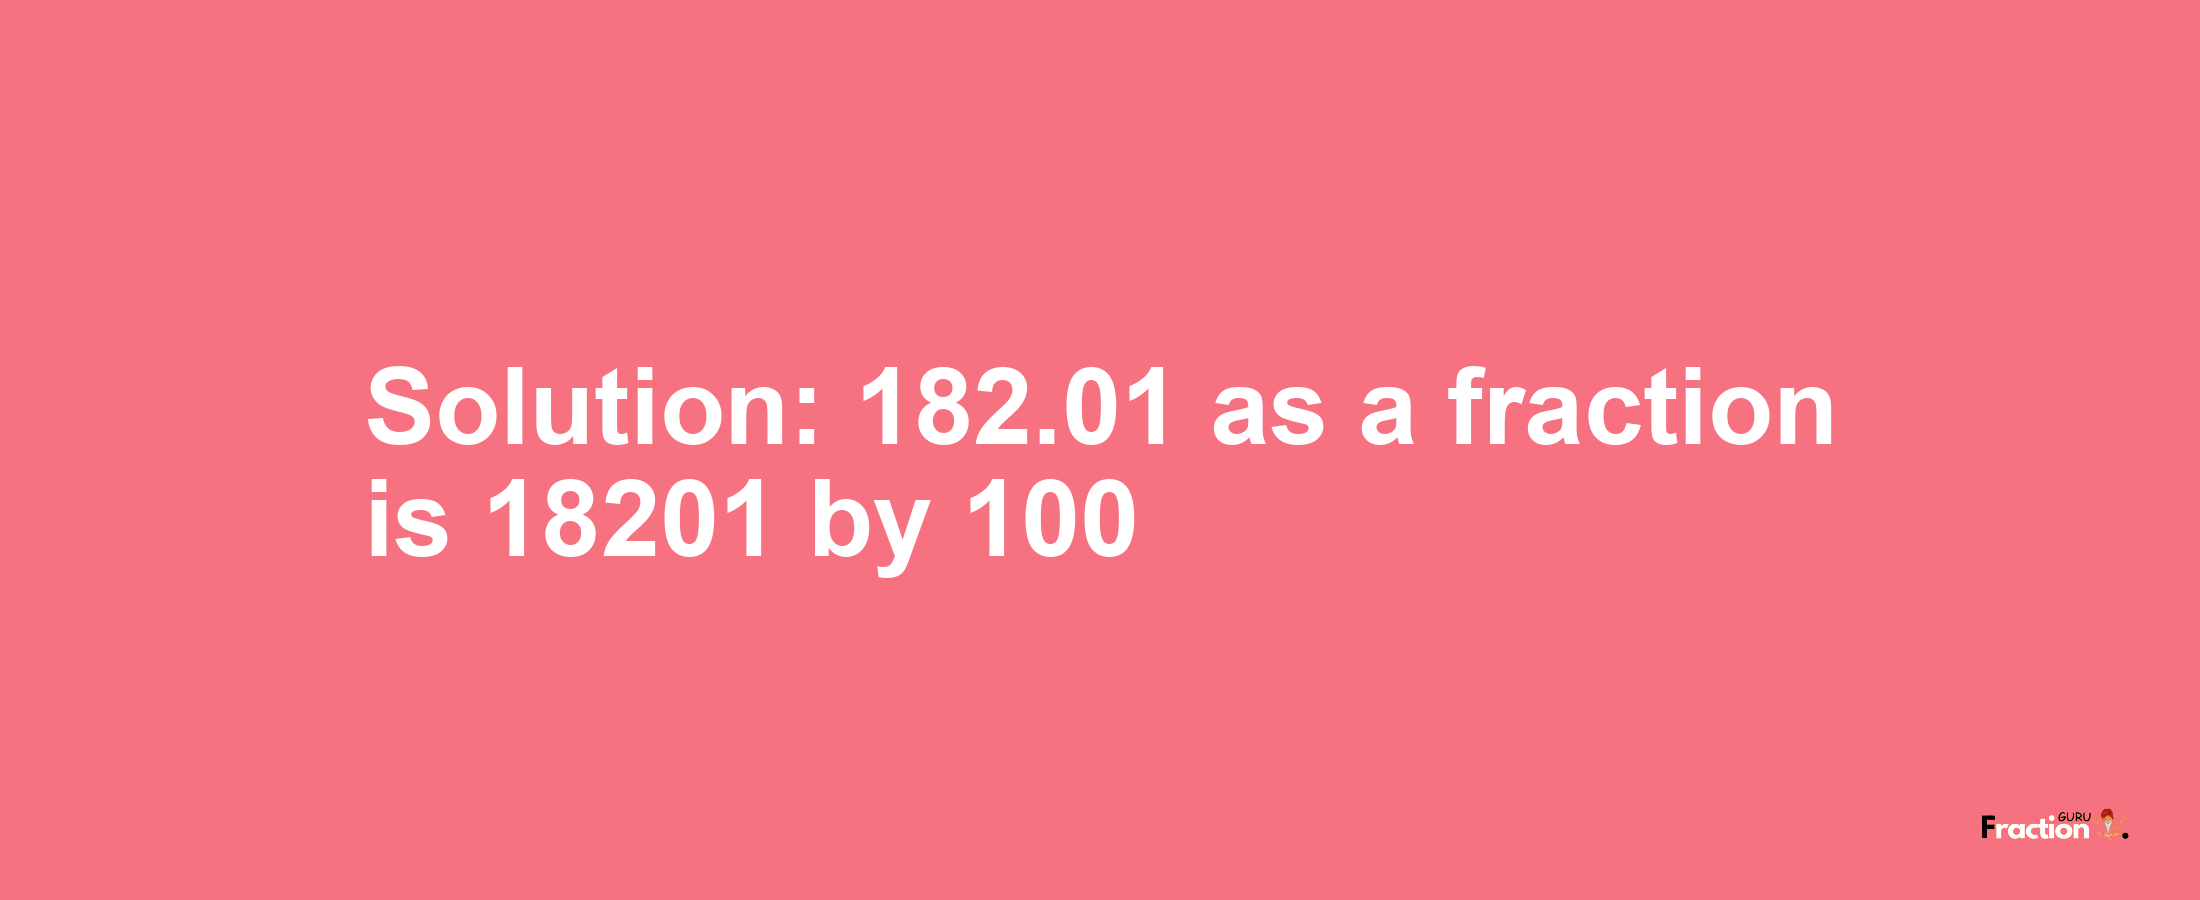 Solution:182.01 as a fraction is 18201/100